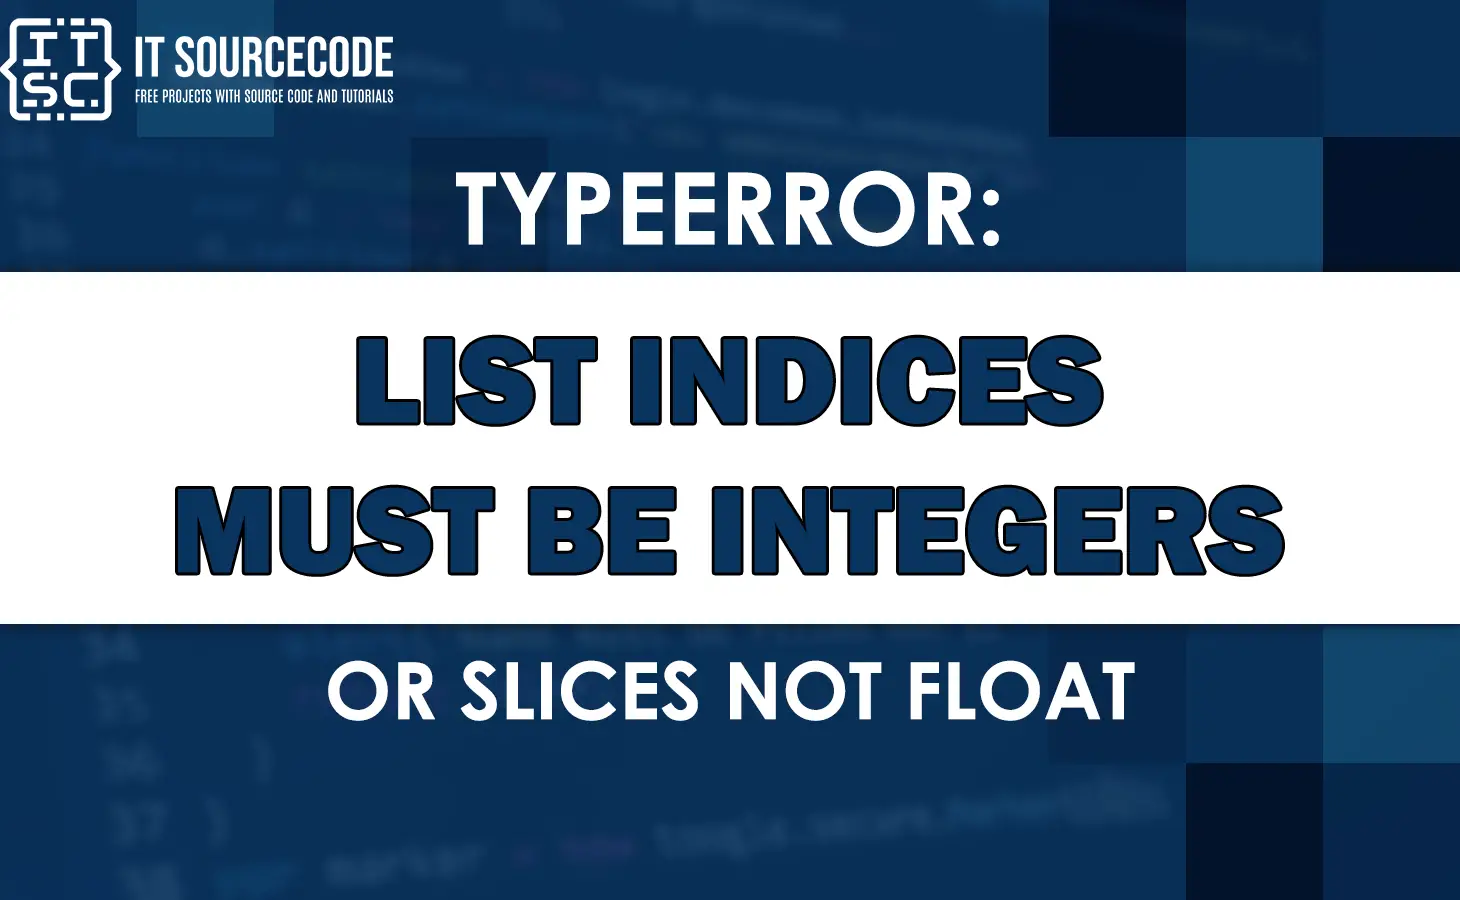 Typeerror list indices must be integers or slices not float